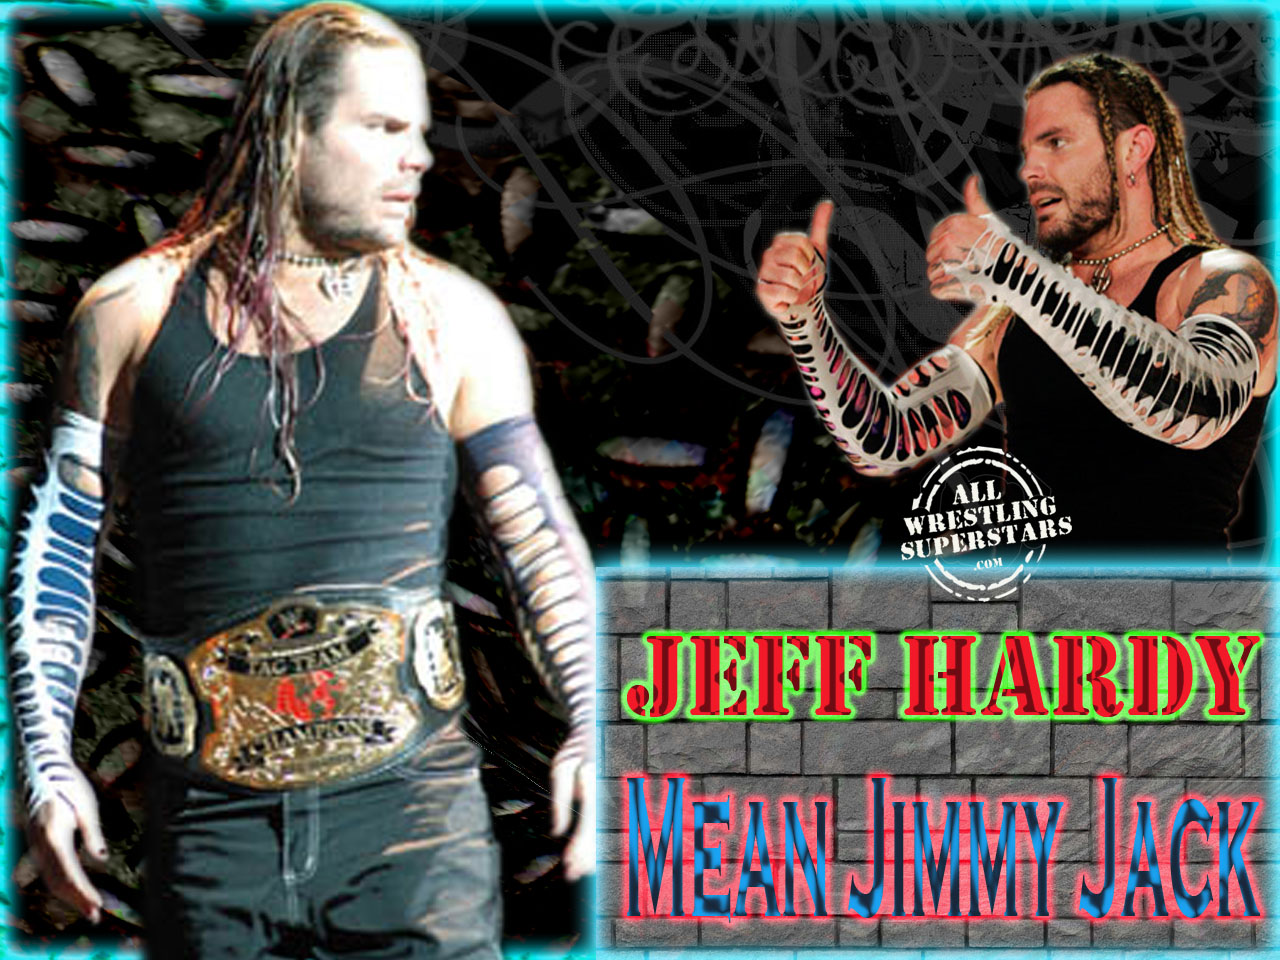 Jeff Hardy Is A Four Time Intercontinental Champion Click On Image To